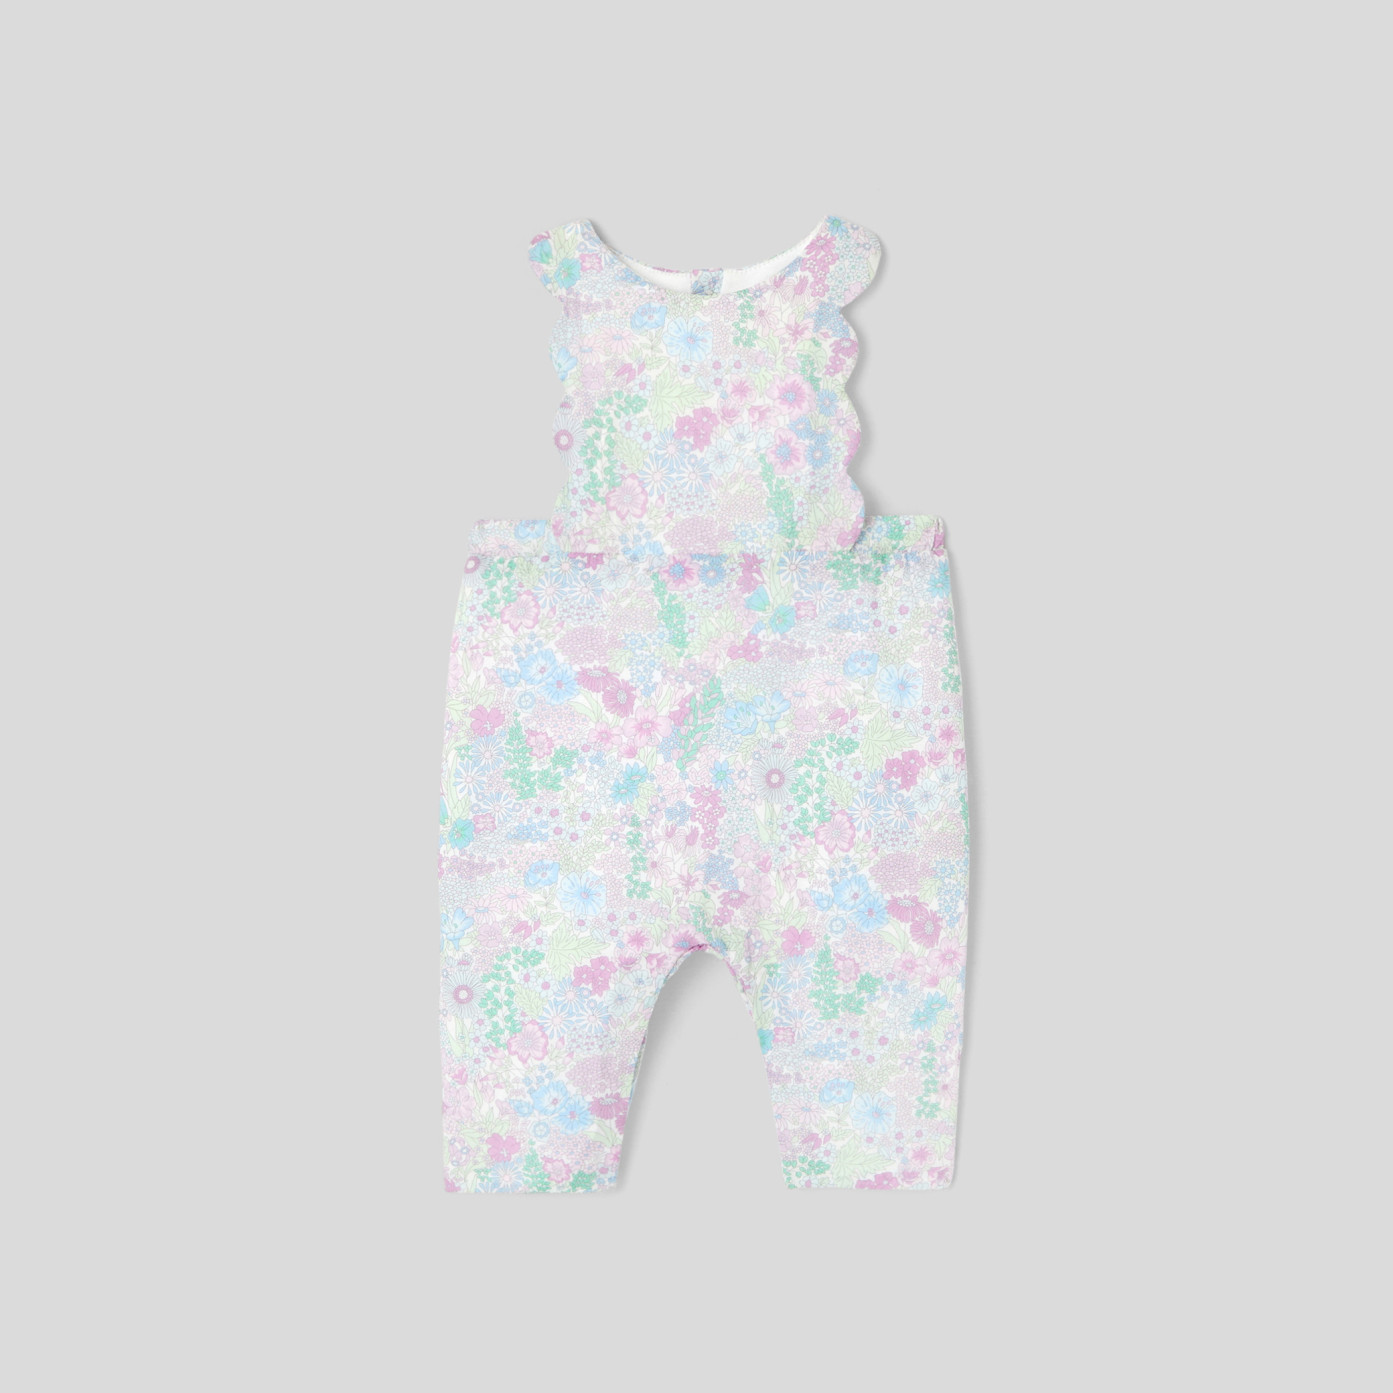 Baby girl jumpsuit in Liberty fabric | Israel